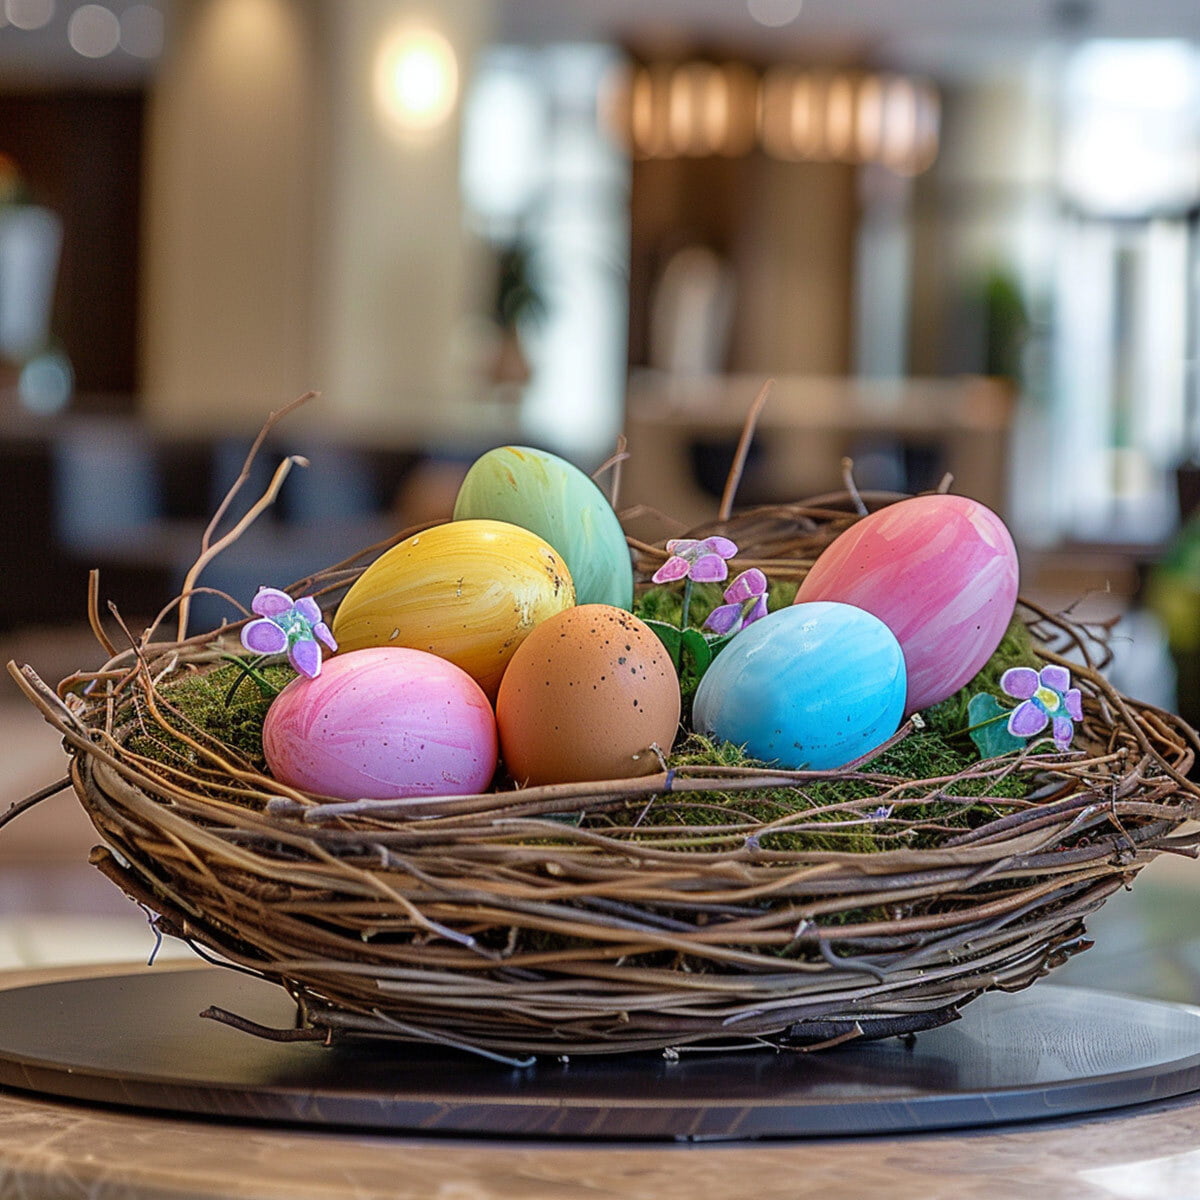 Spend the Easter days with us at the Seehotel and enjoy the springtime.